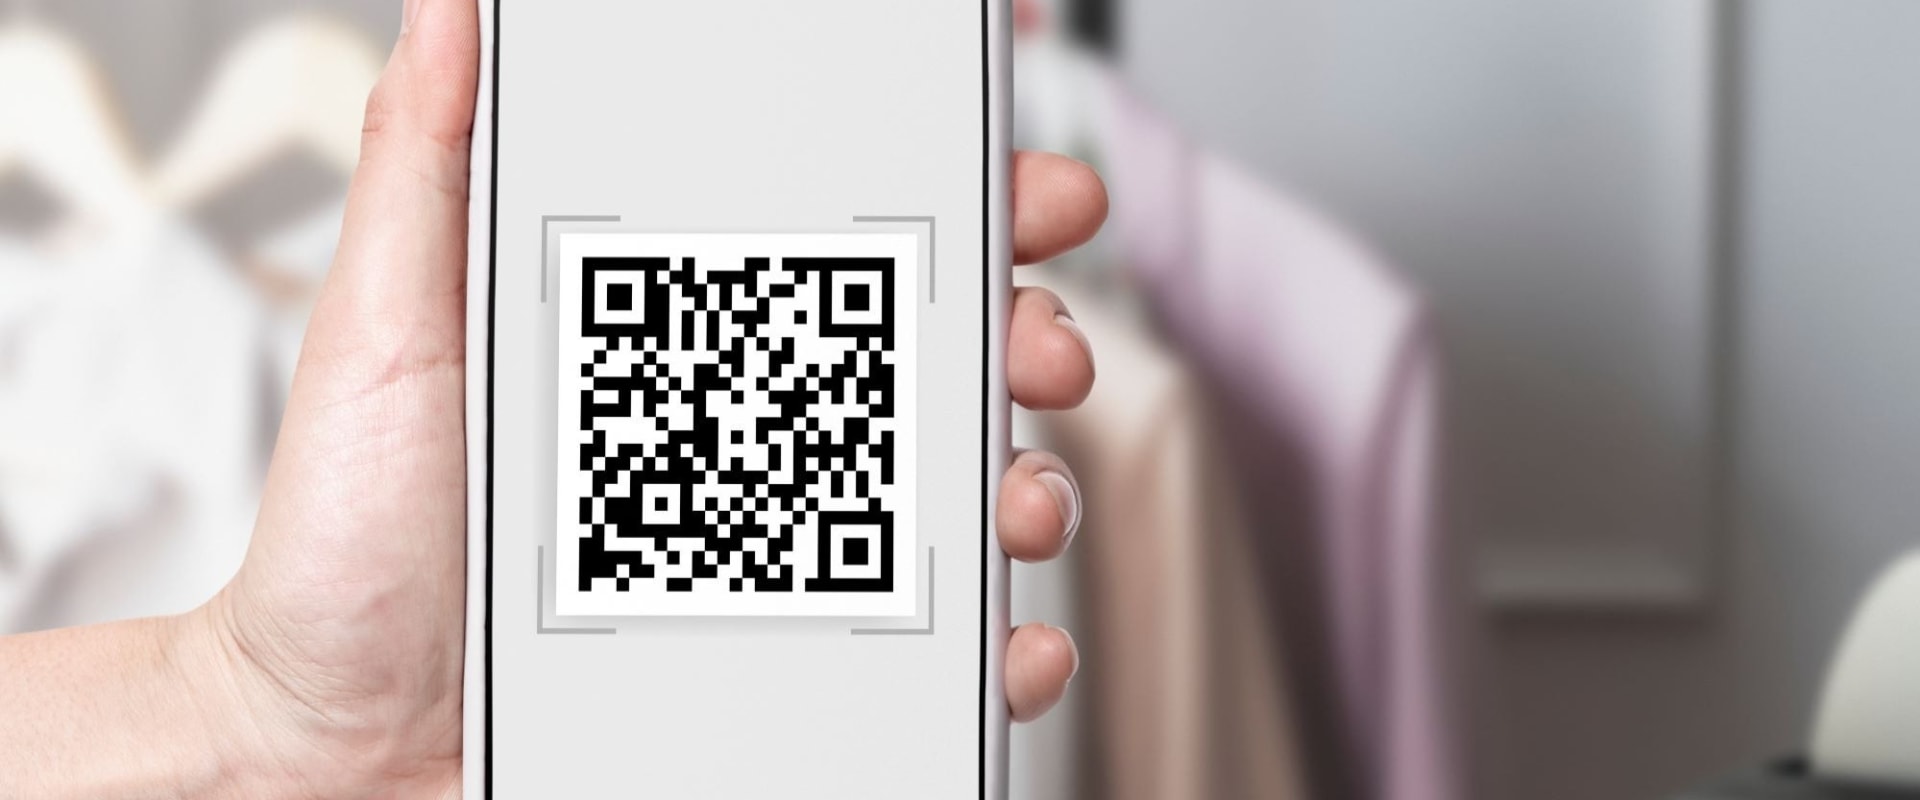 Features of the Best QR Code Scanner